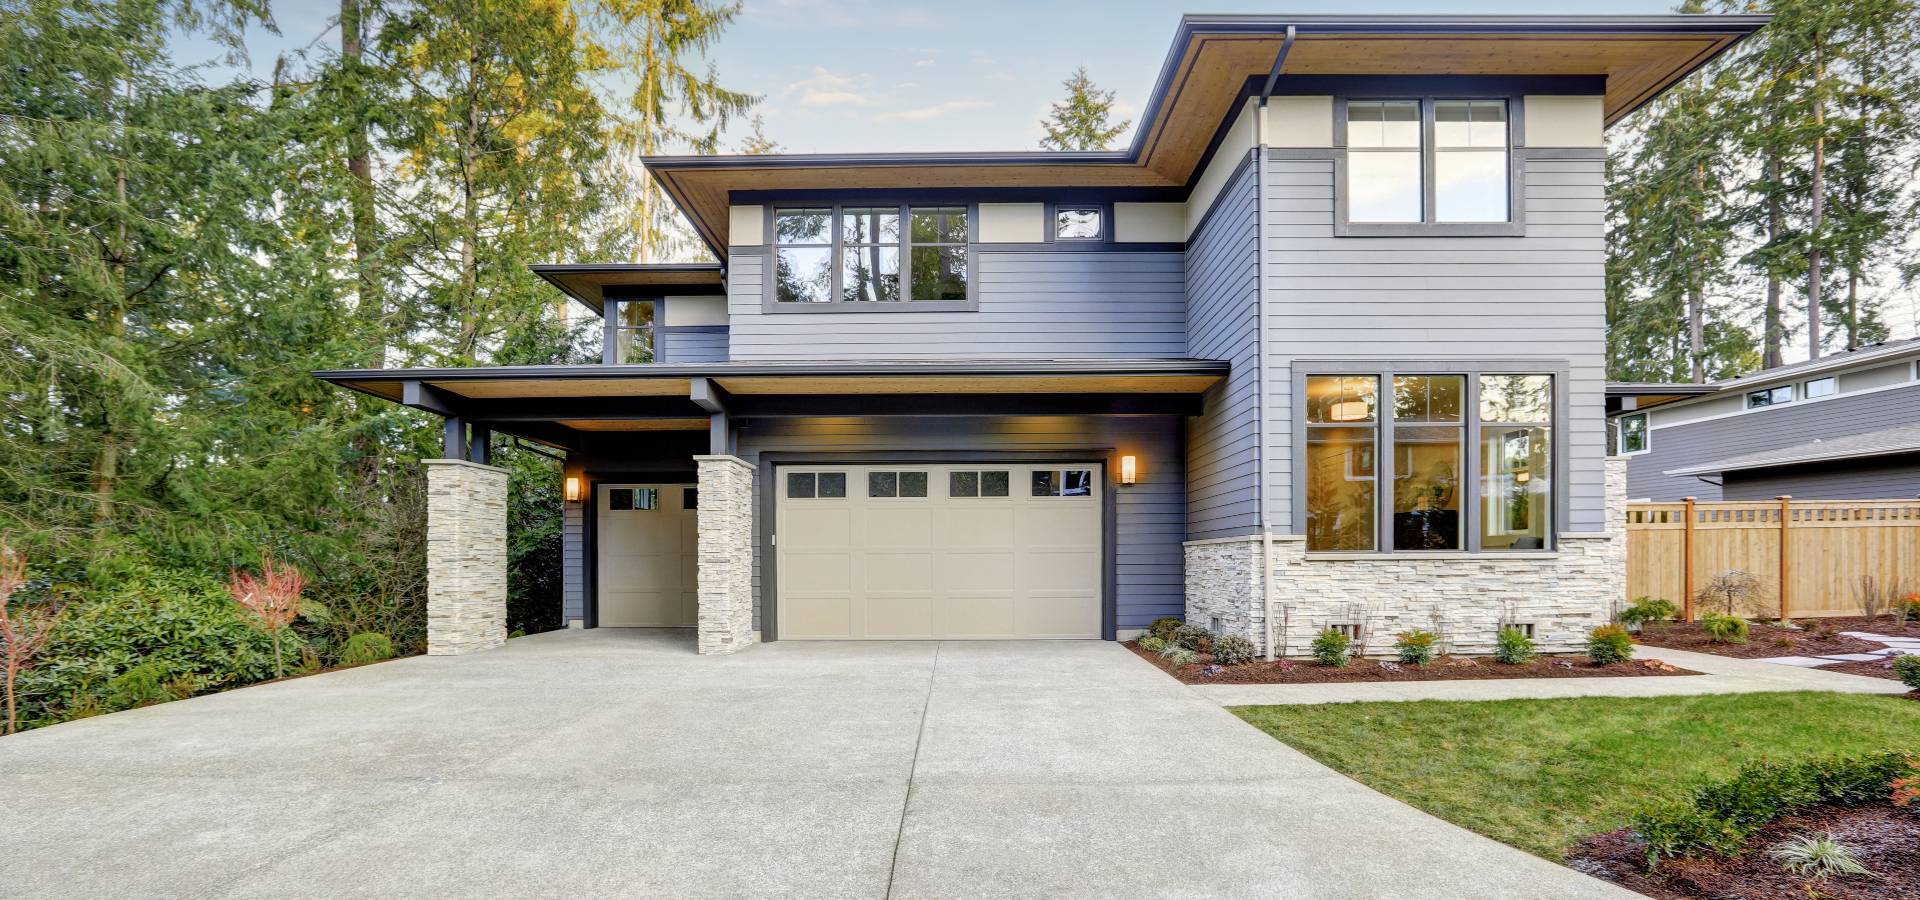 Luxurious new construction home in Bellevue, WA. Modern style home boasts two car garage framed by blue siding and natural stone wall trim